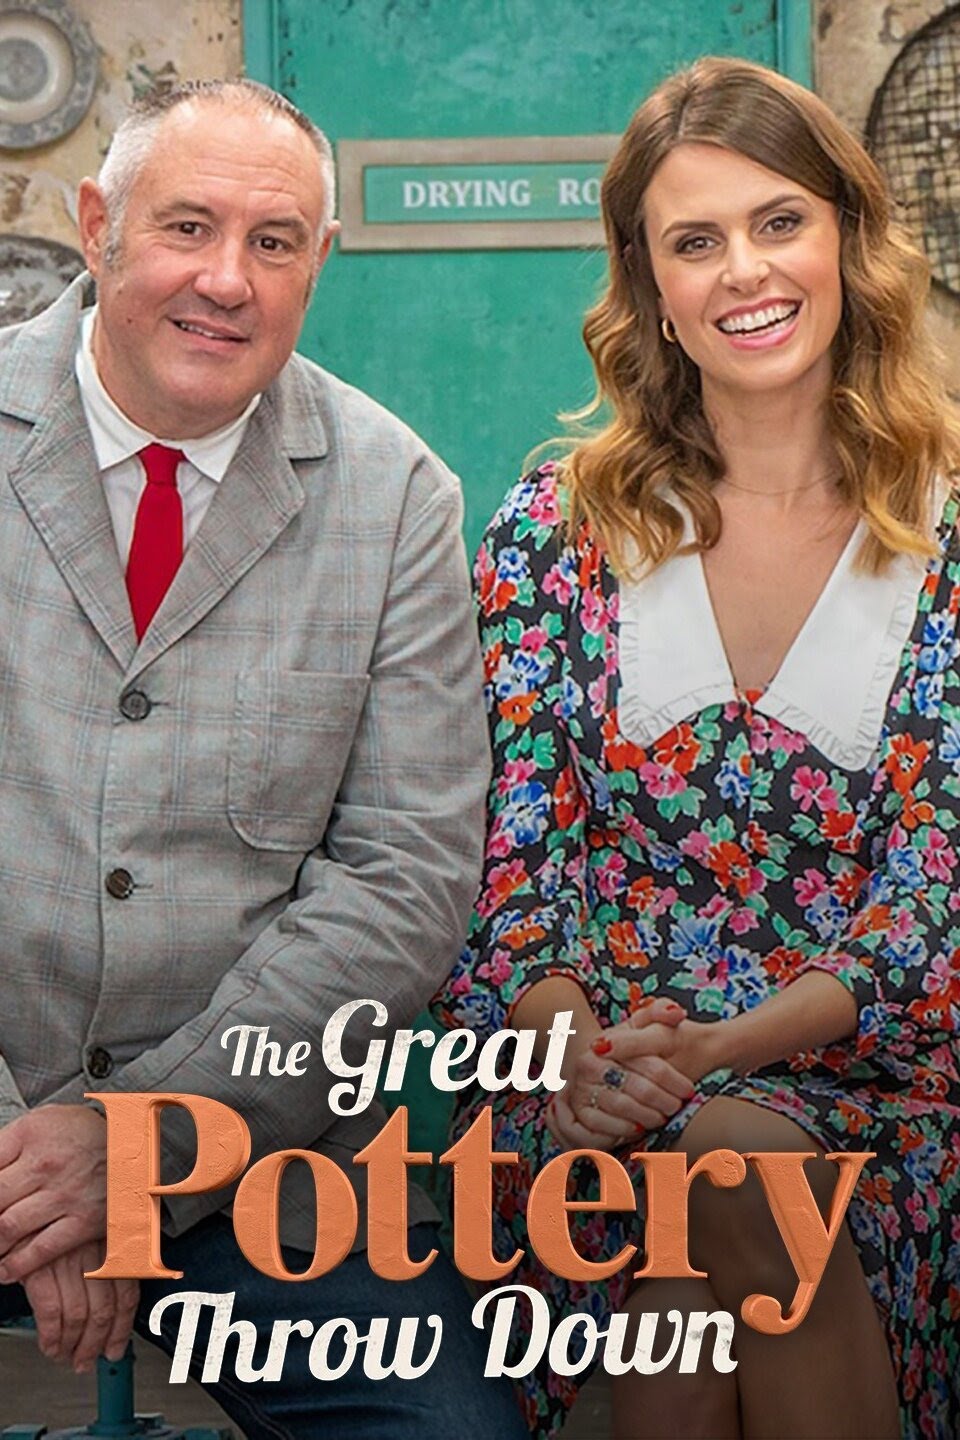 The Great Pottery Throw Down on HBO Max